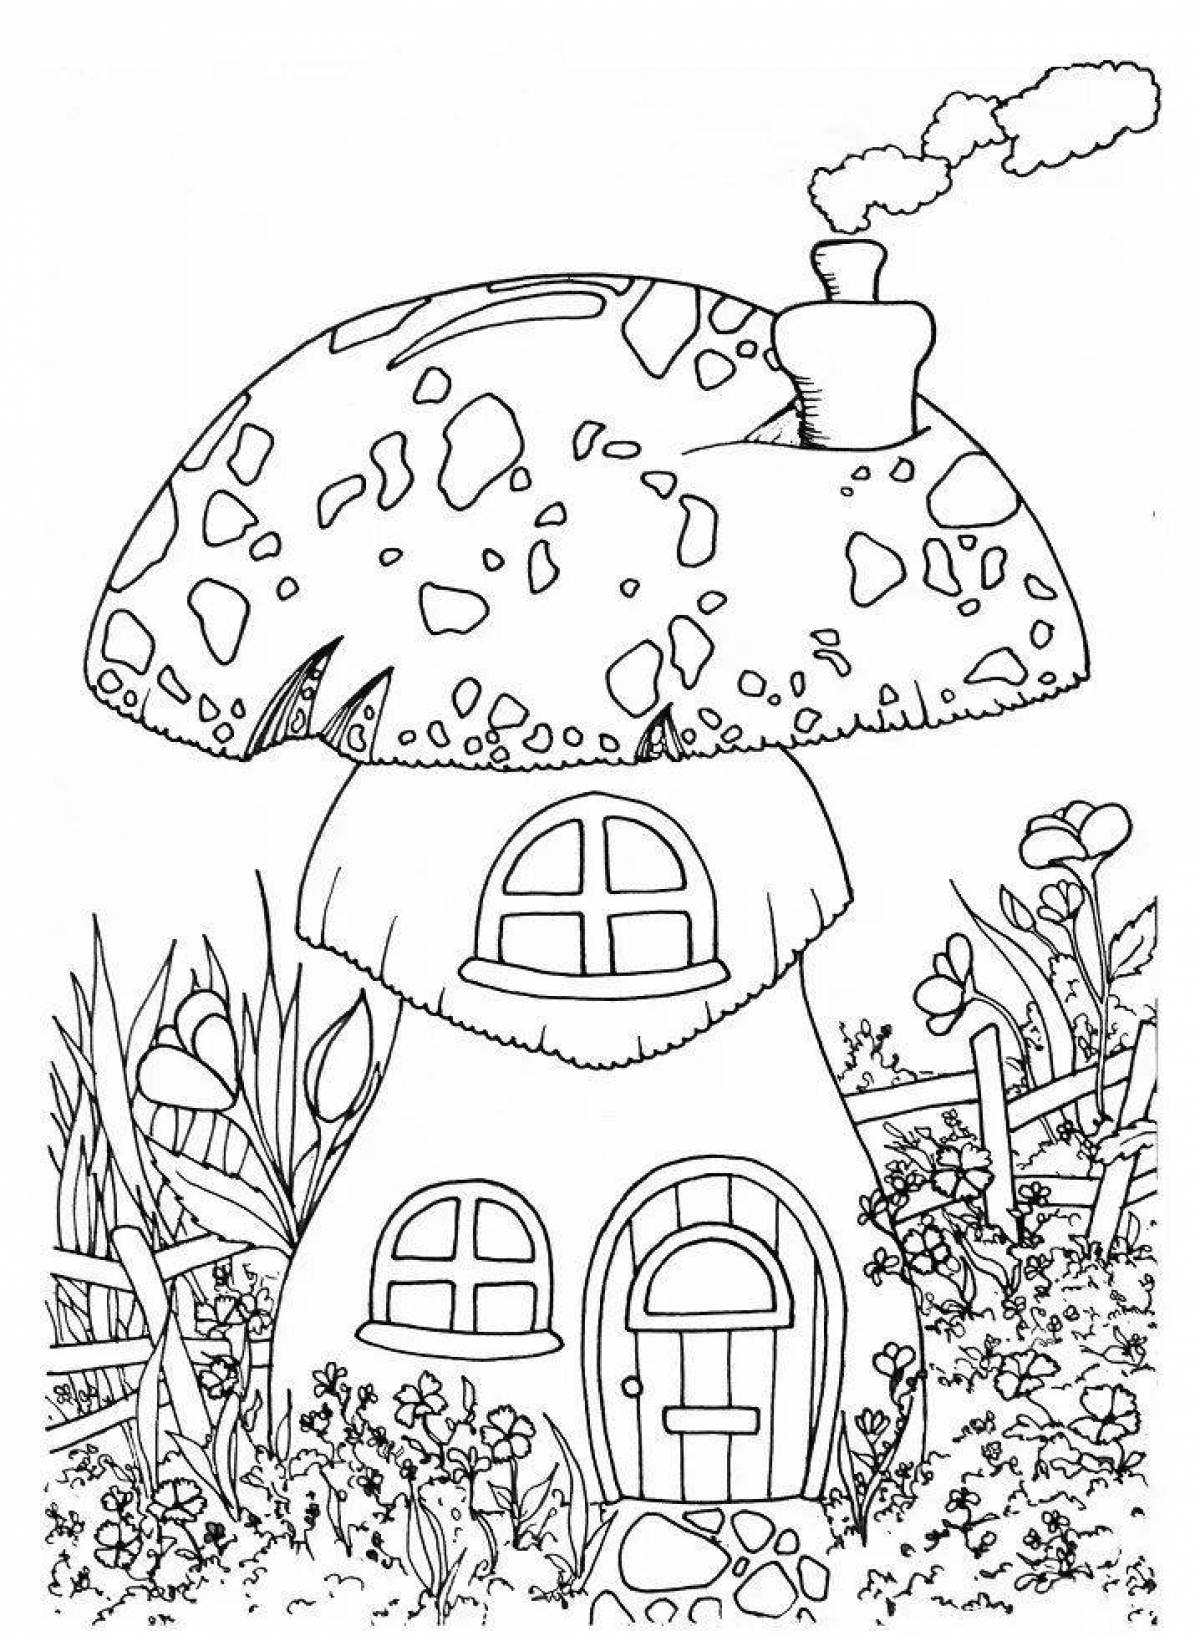 Colorful forest house coloring book